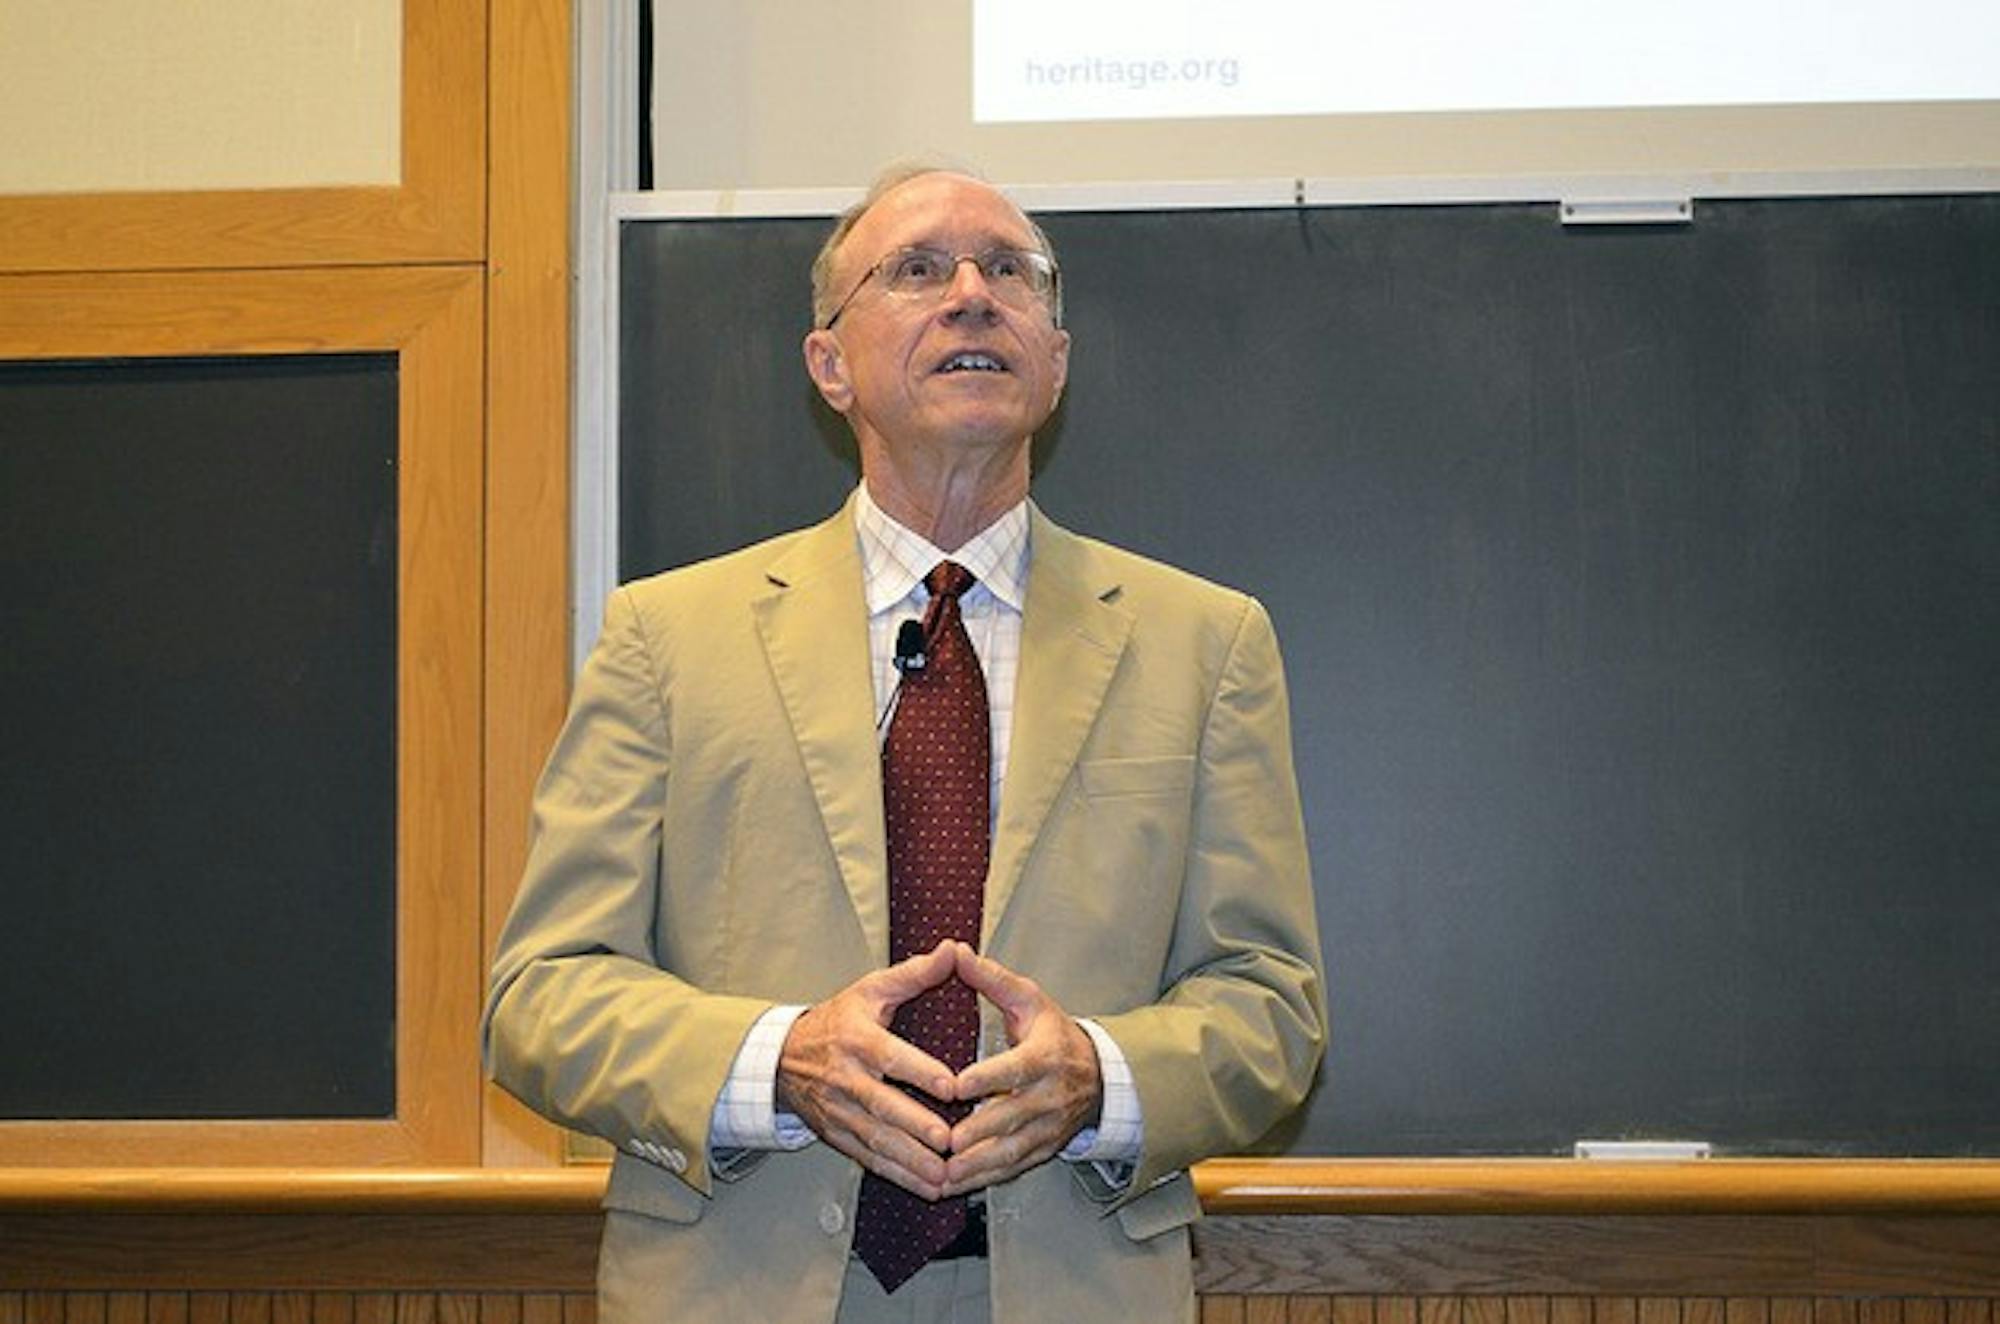 Director of the Heritage Foundation's Center for Data Analysis William Beach spoke Thursday about the effect of the current fiscal crisis on students' futures.